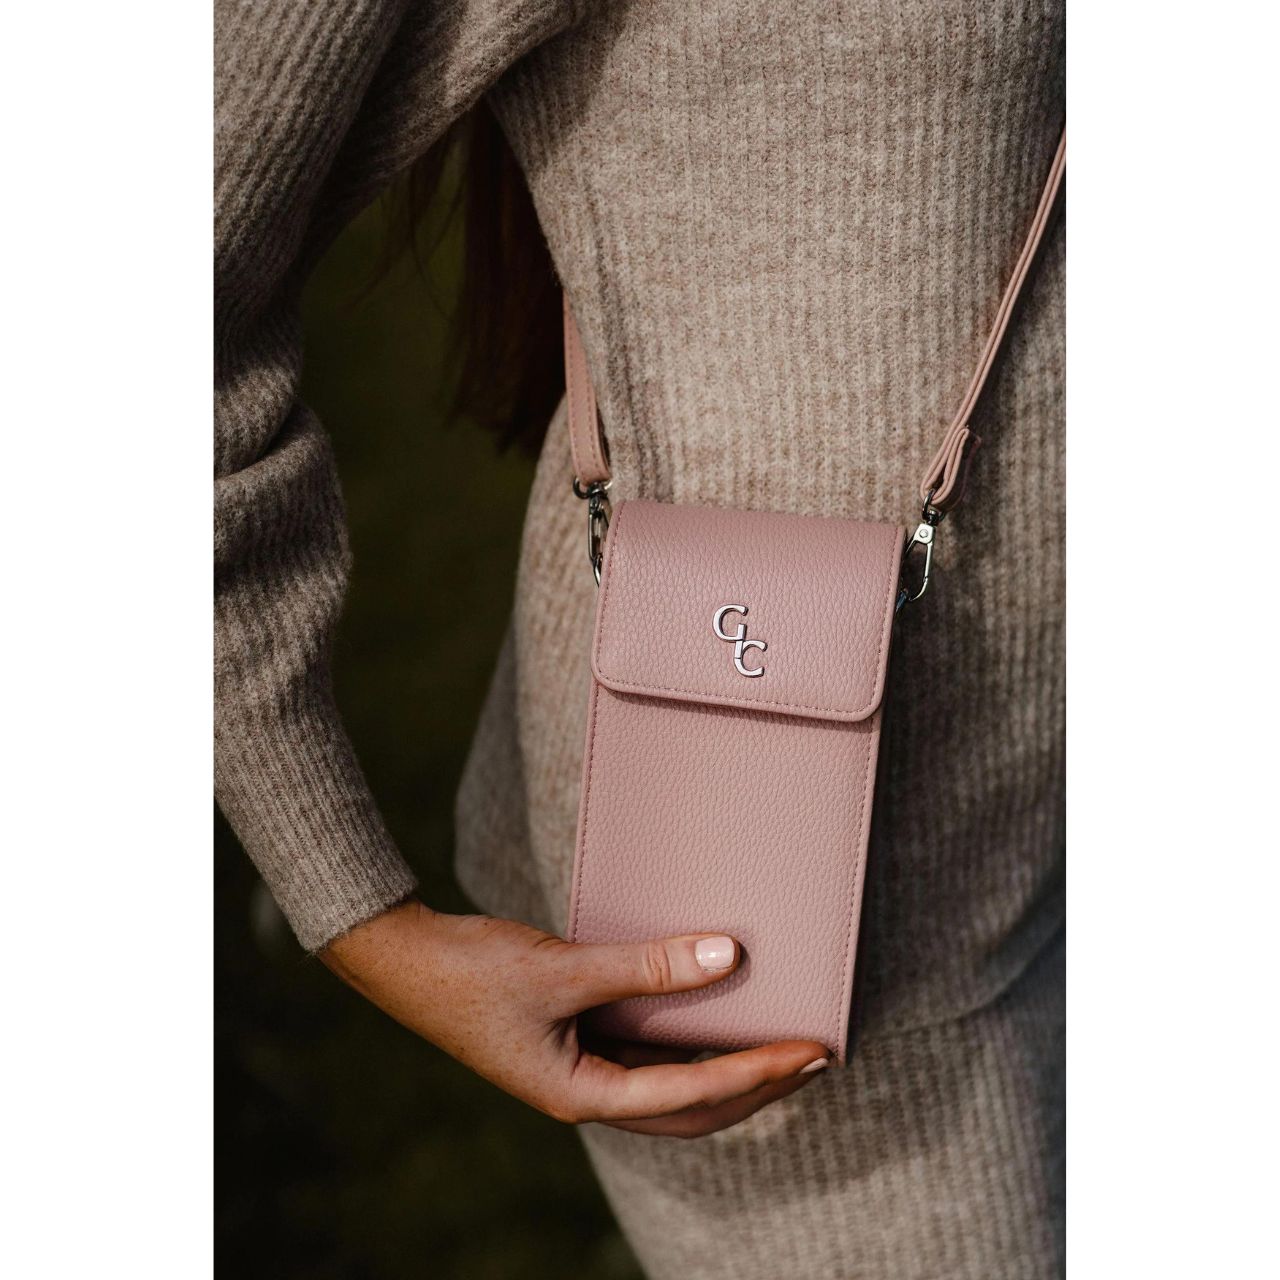 Galway Crystal Mini Cross Body Bag - Rose Pink  Introducing the new must have accessory that is truly functional. Our Light weight, Slim, Sleek, Crossbody bag is designed to hold the most essential accessory: Your mobile phone. There is nothing more liberating than carrying a lightweight bag that carries your essentials.